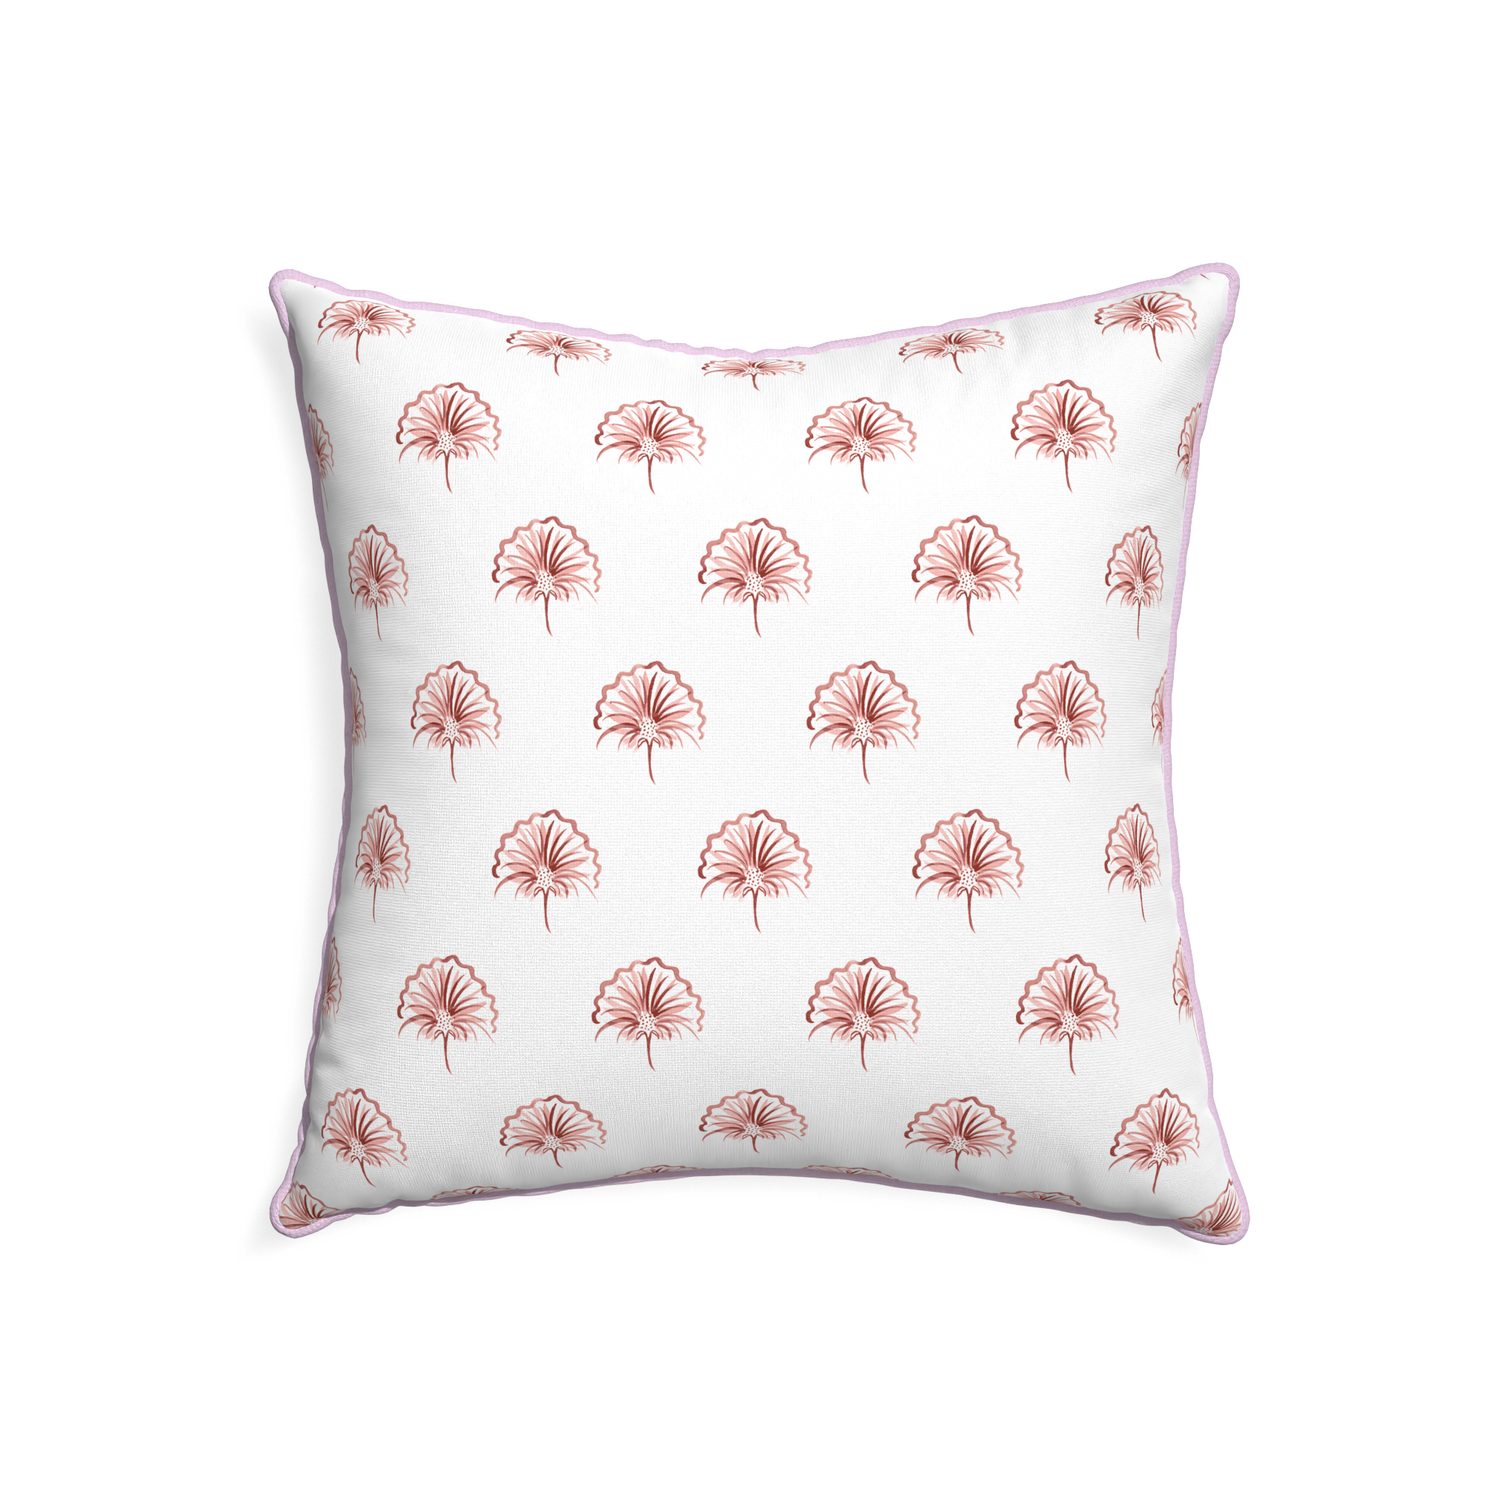 22-square penelope rose custom floral pinkpillow with l piping on white background